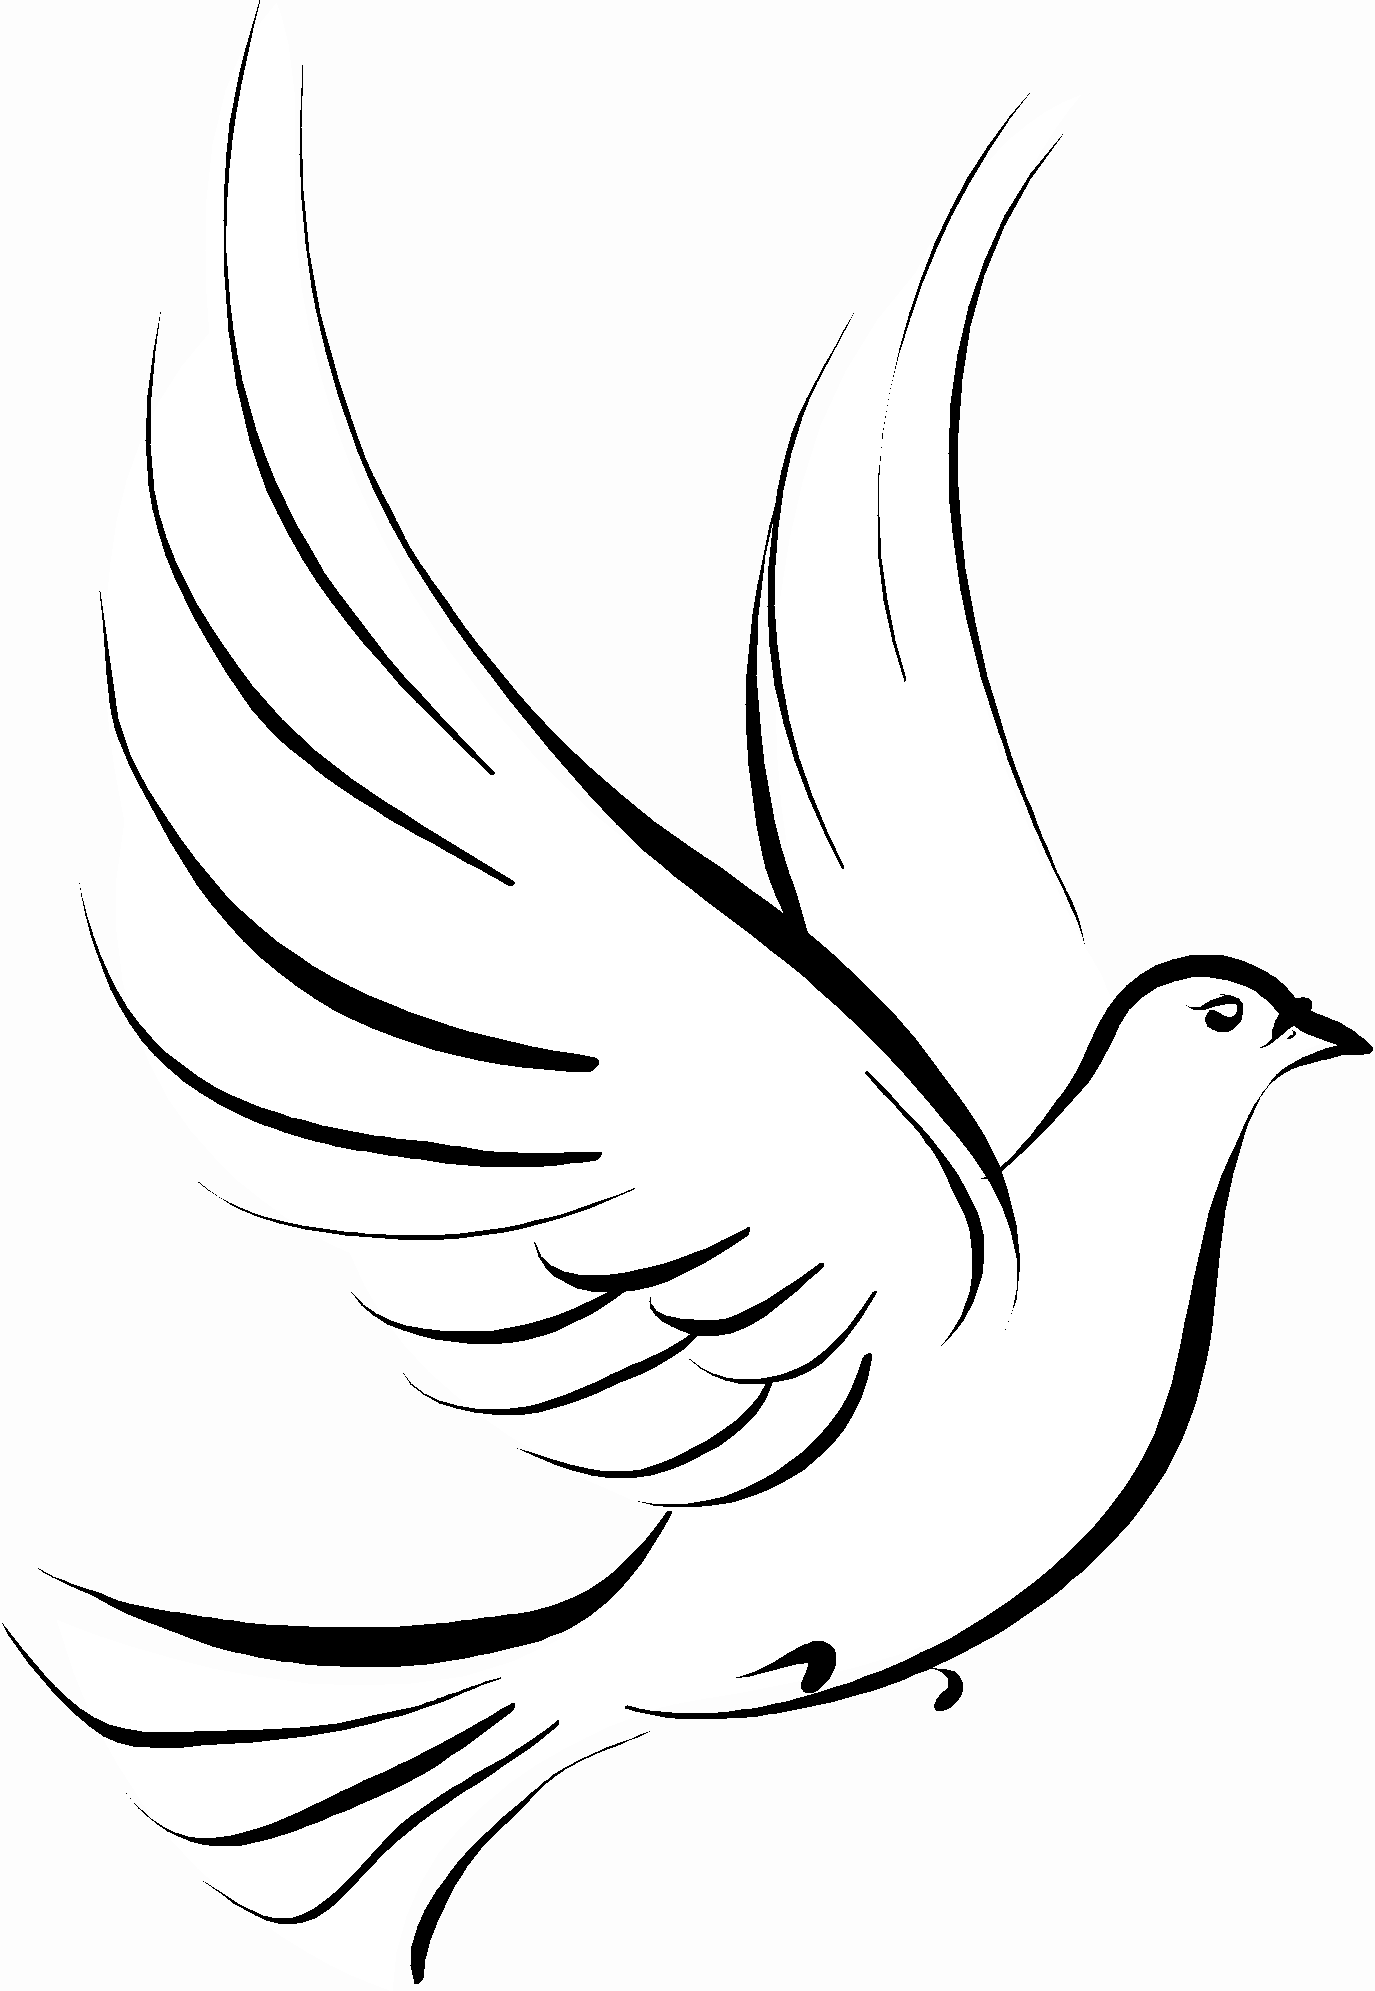 Two Doves Flying Clipart